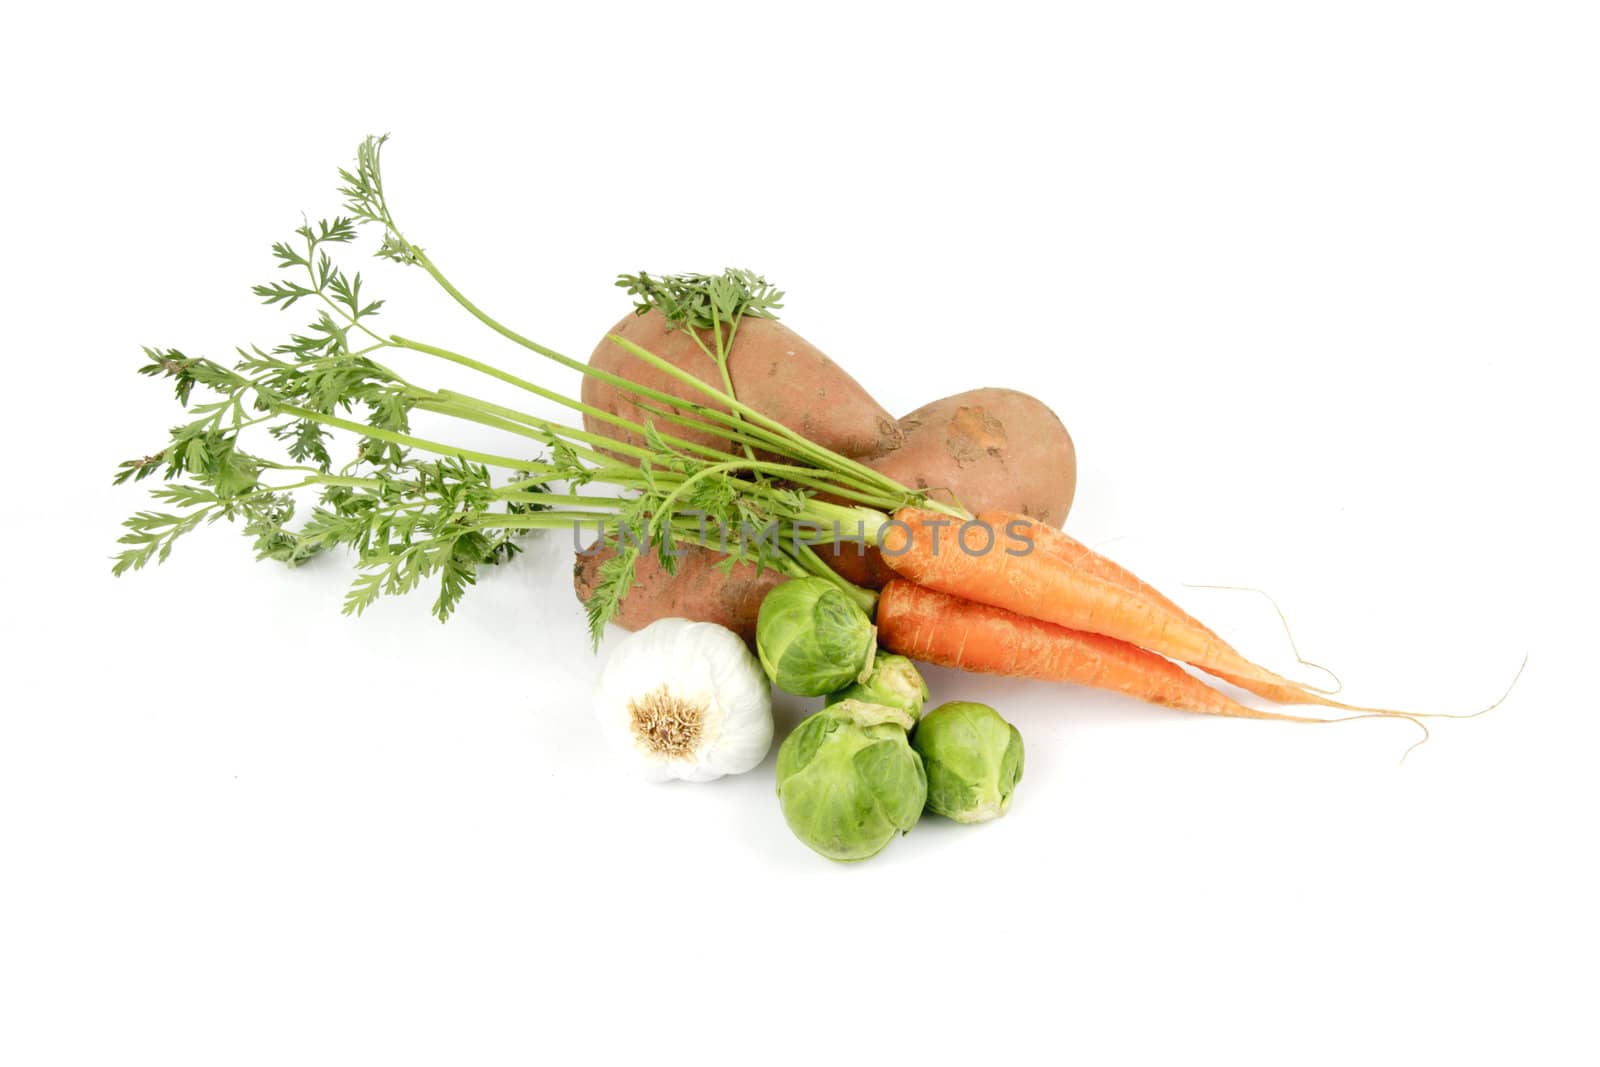 Two pink sweet potatoes with a garlic bulb, carrots and green sprouts on a reflective white background